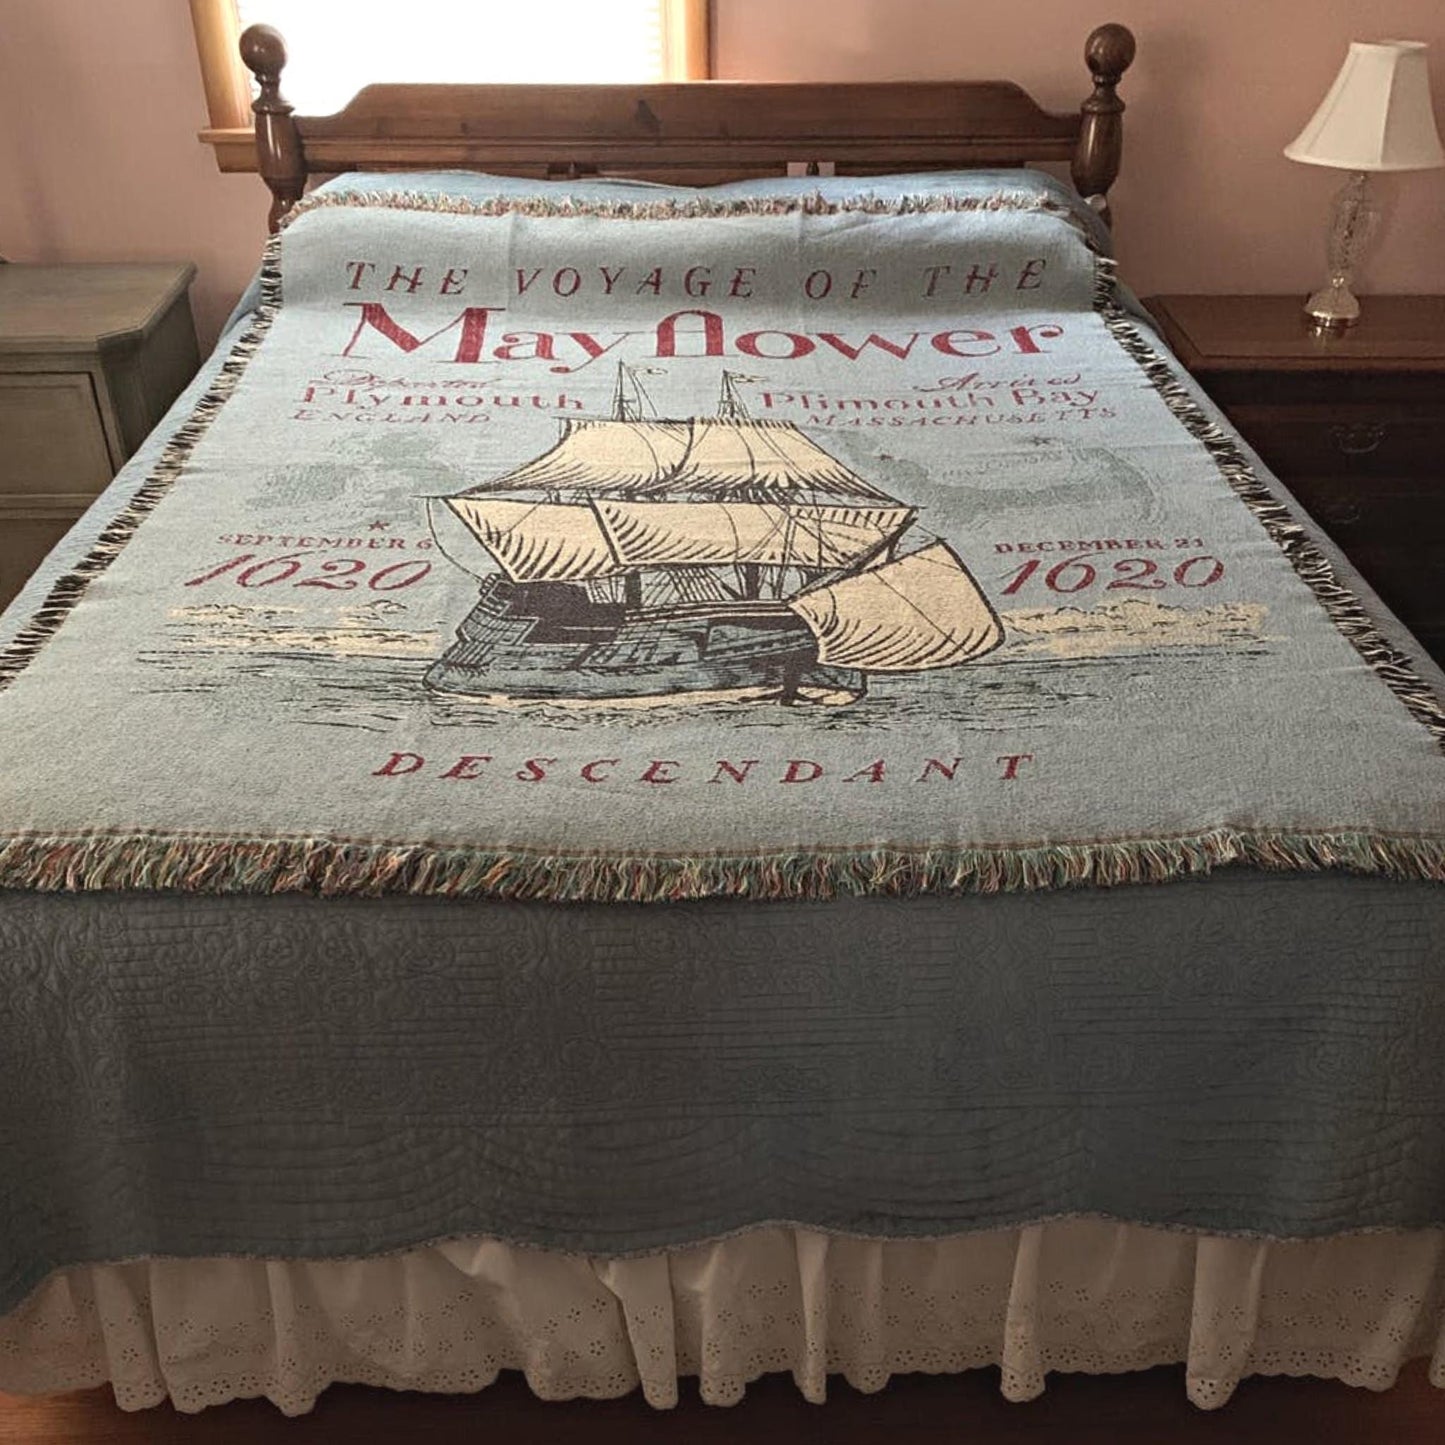 Blanket on Bed - "Voyage of the Mayflower" Blanket woven in the US from the History List Store